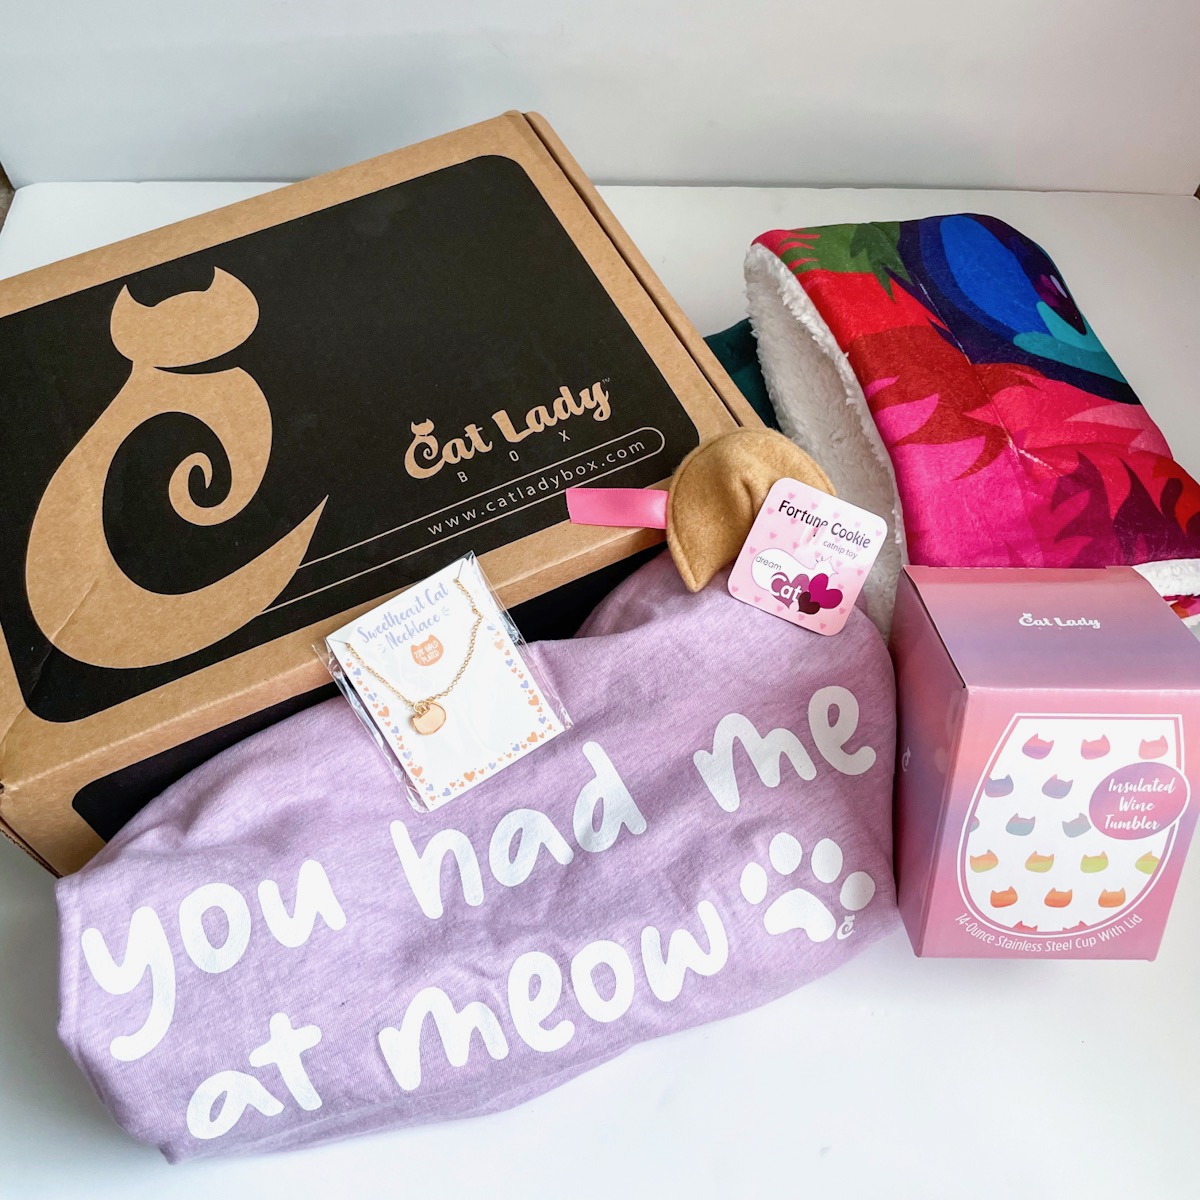 Crazy Cat Lady Box Subscription February 2022 Review + Coupon MSA